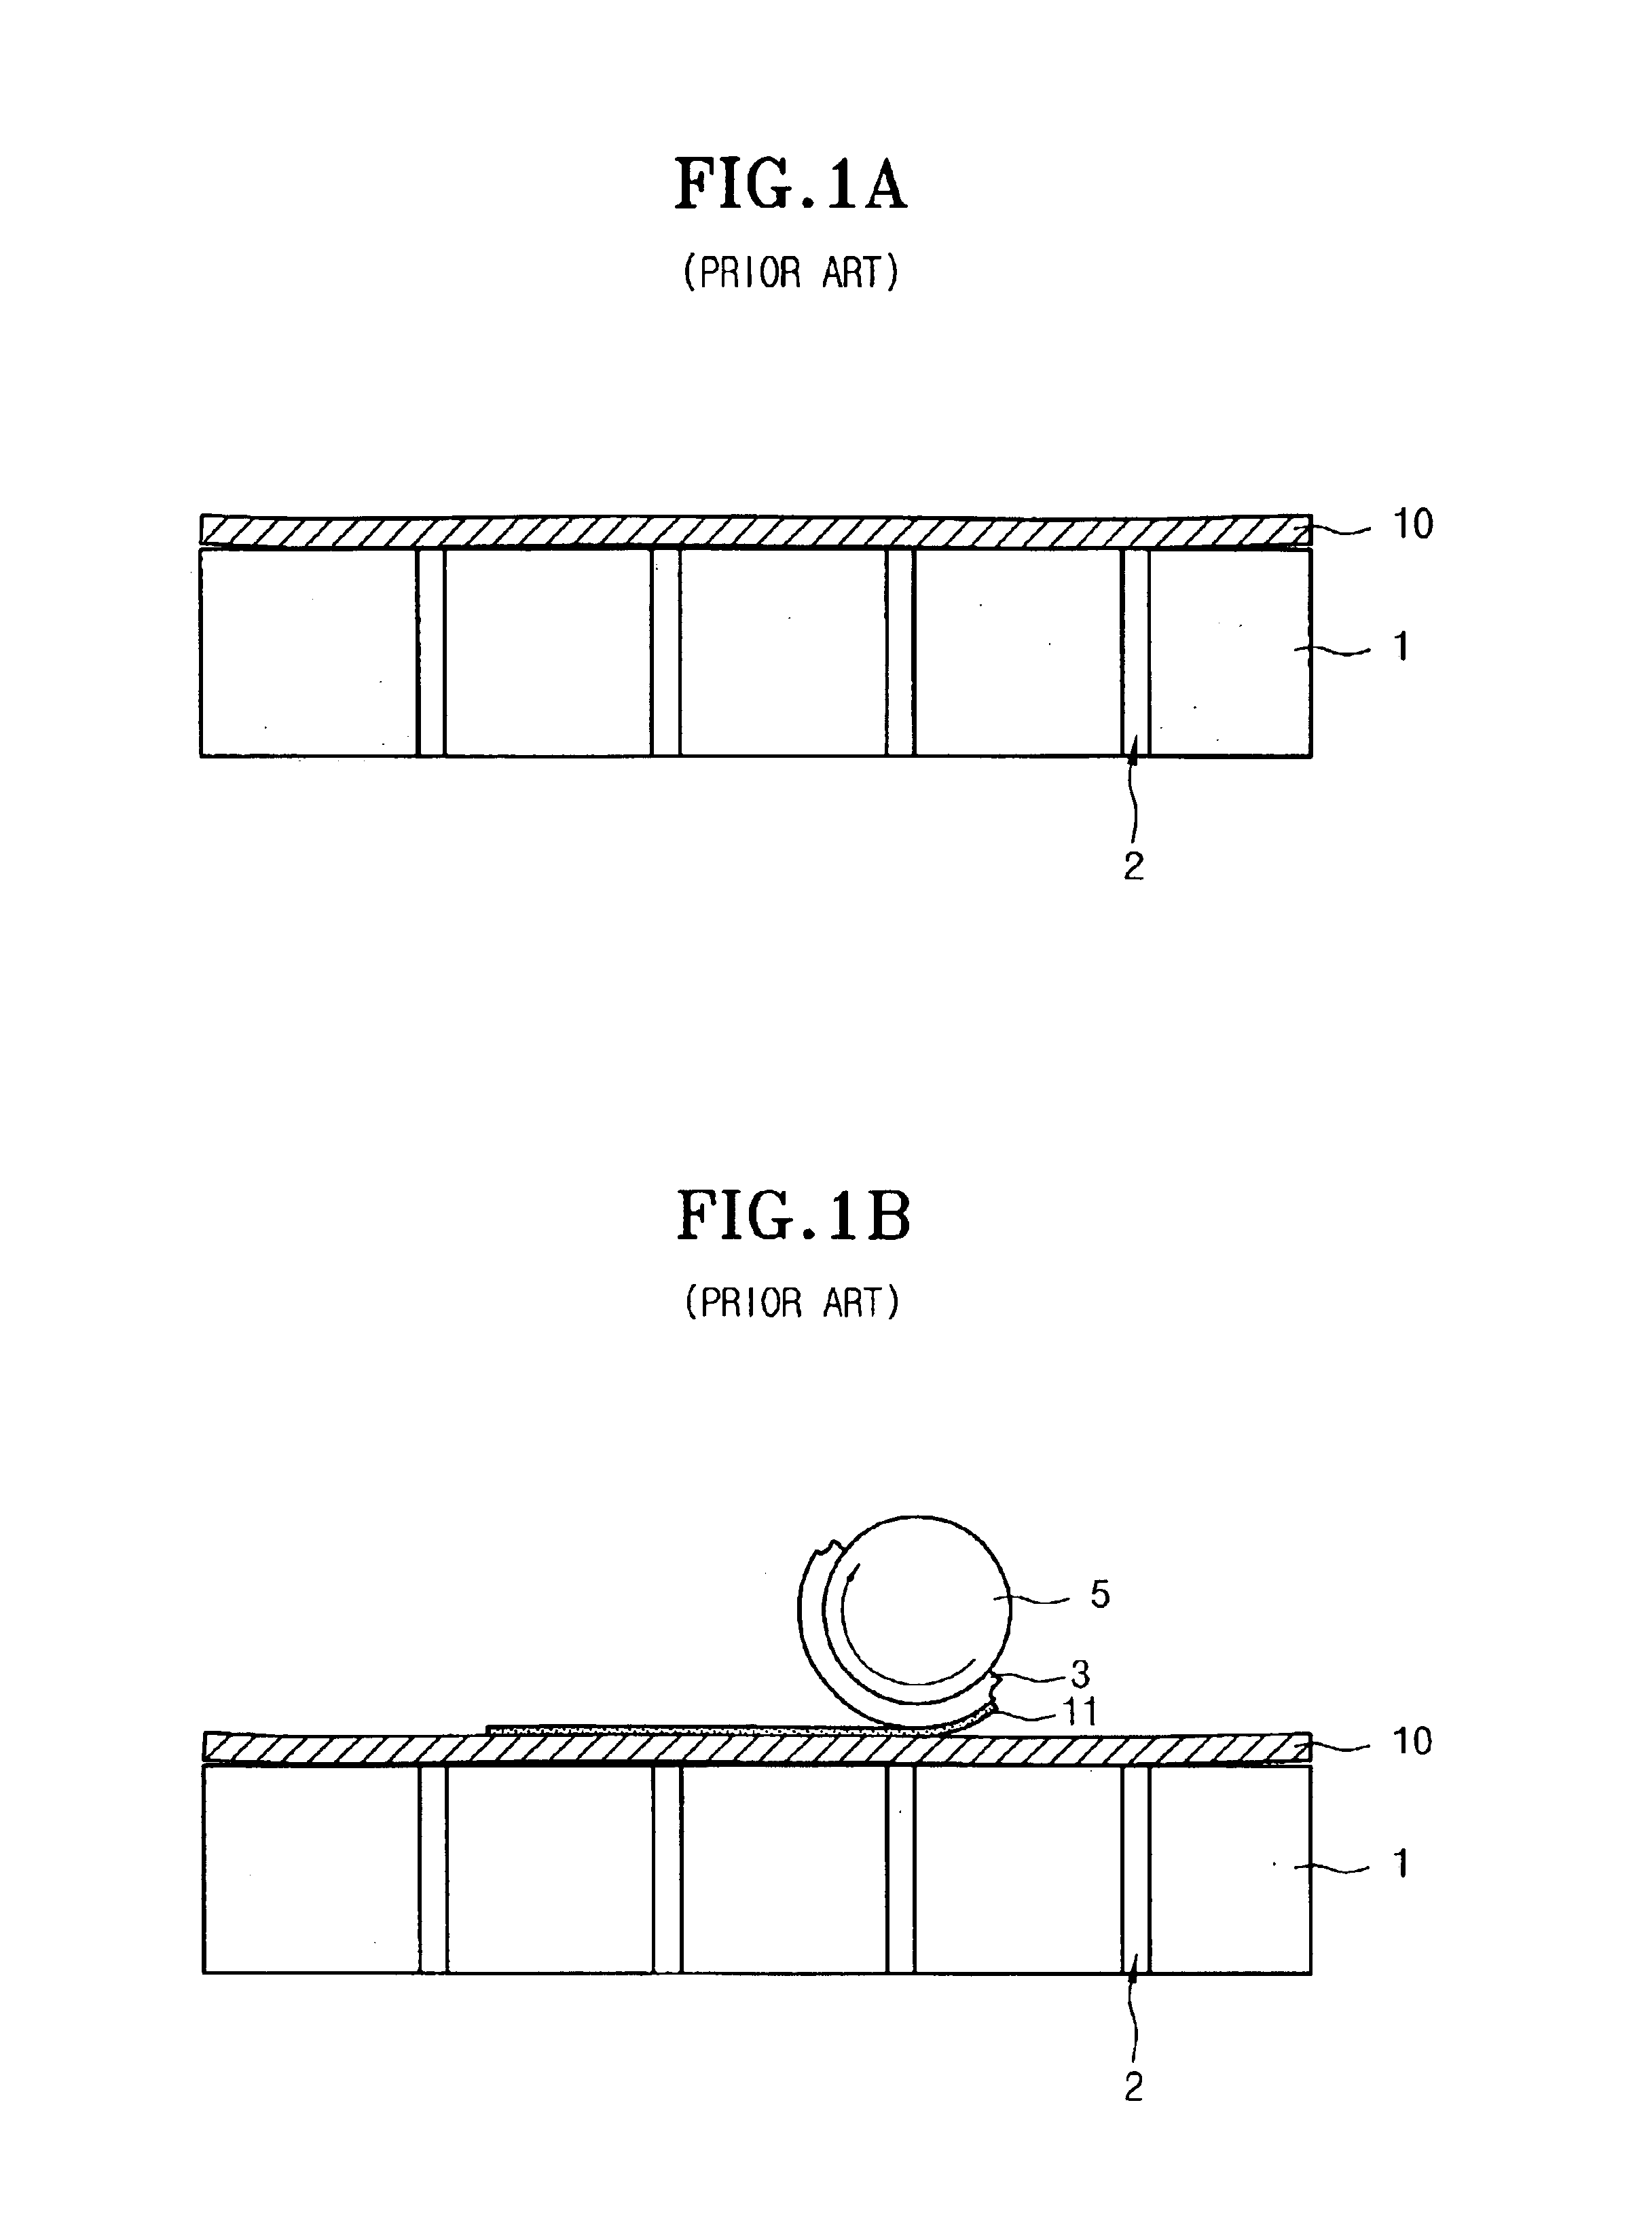 Liquid crystal display device with plastic substrate